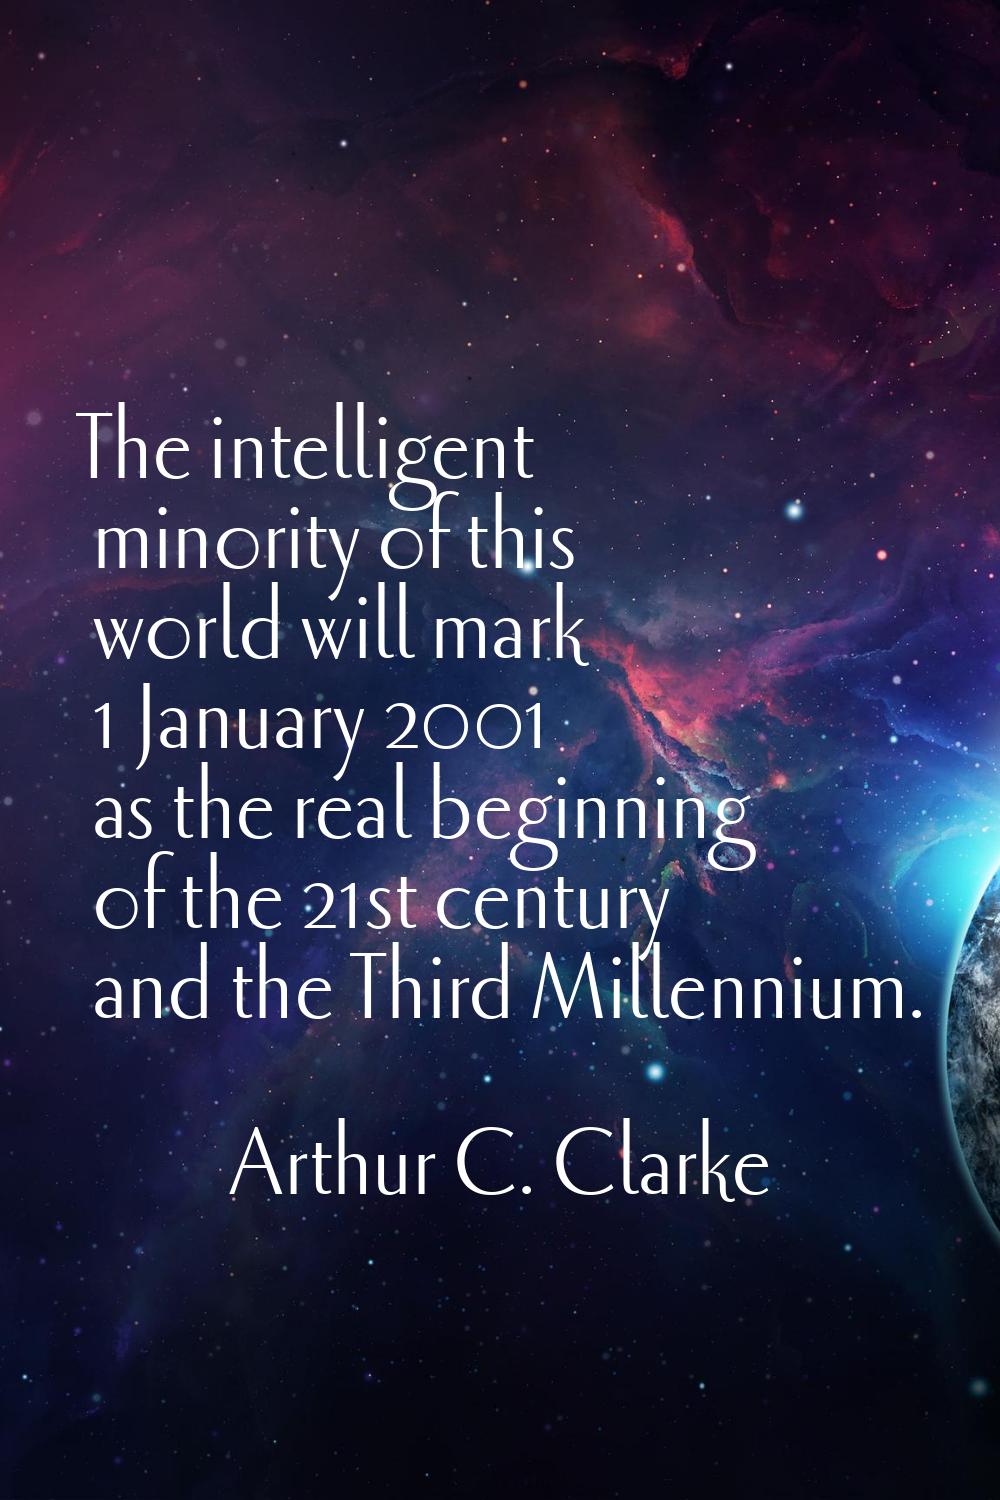 The intelligent minority of this world will mark 1 January 2001 as the real beginning of the 21st c